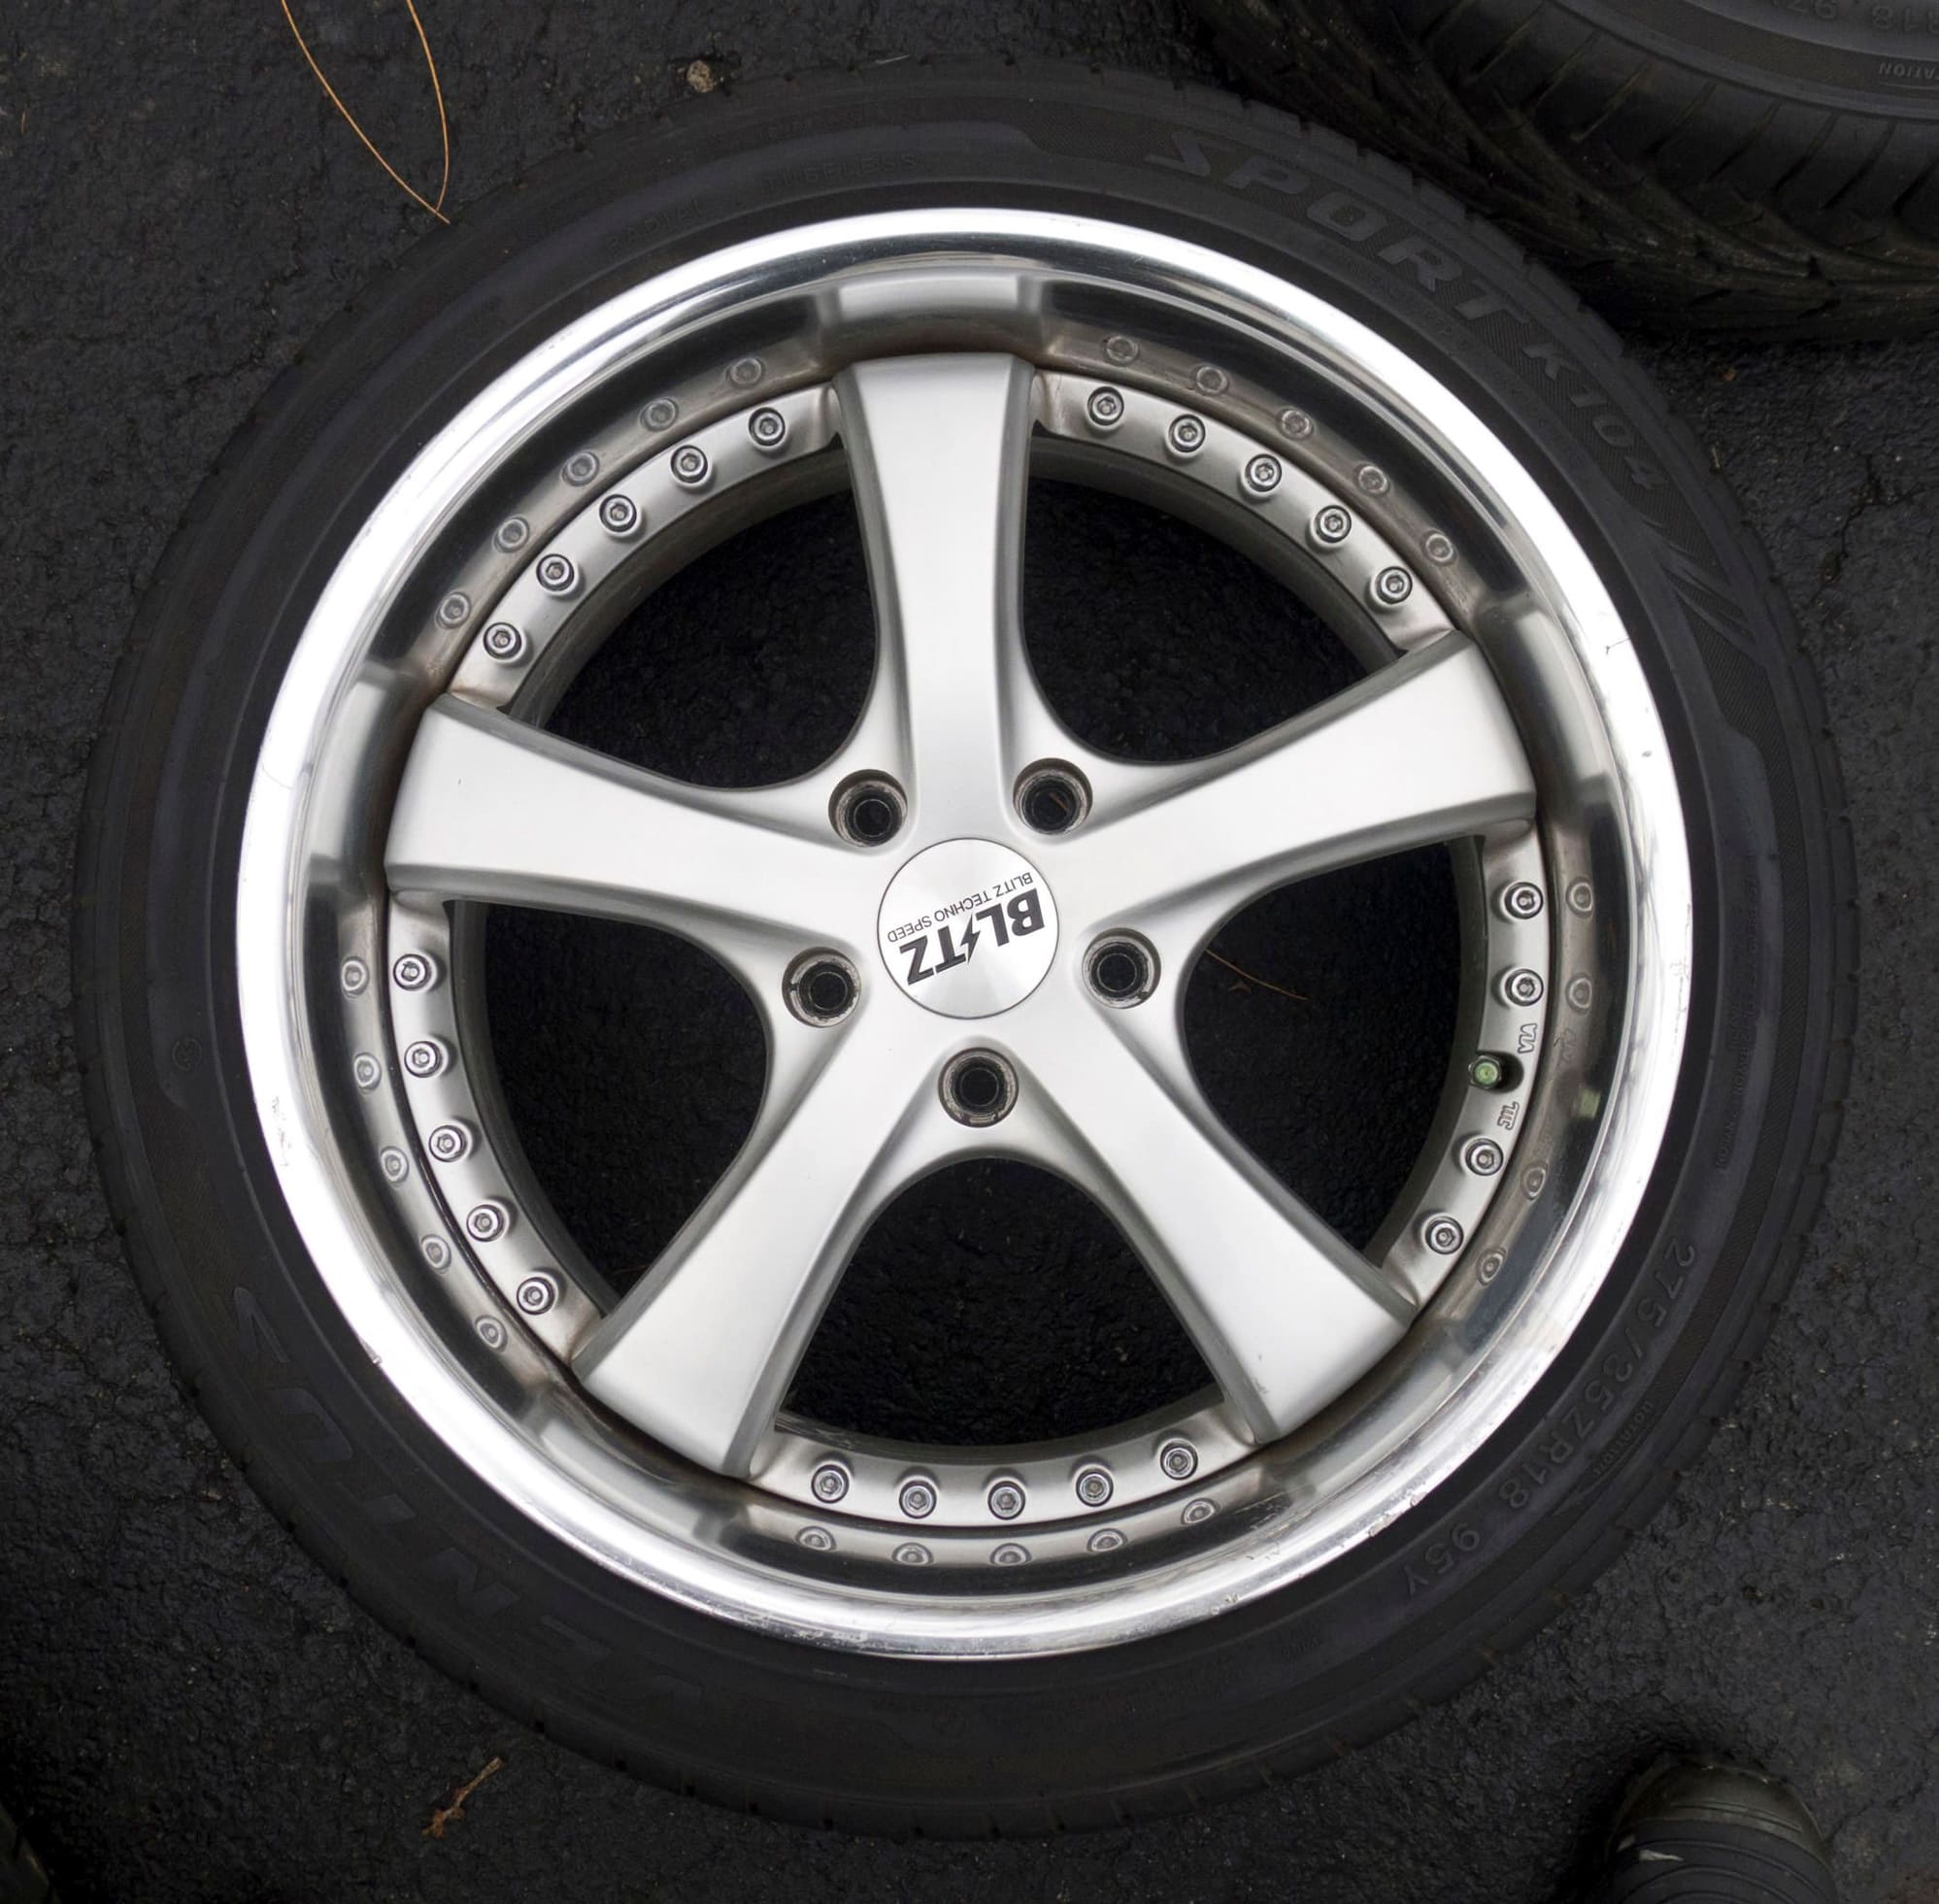 Wheels and Tires/Axles - 18" Blitz TechnoSpeed Z2 wheels & tires - Used - 1992 to 2000 Lexus SC300 - 1992 to 2000 Lexus SC400 - 1993 to 1998 Toyota Supra - Lombard, IL 60148, United States